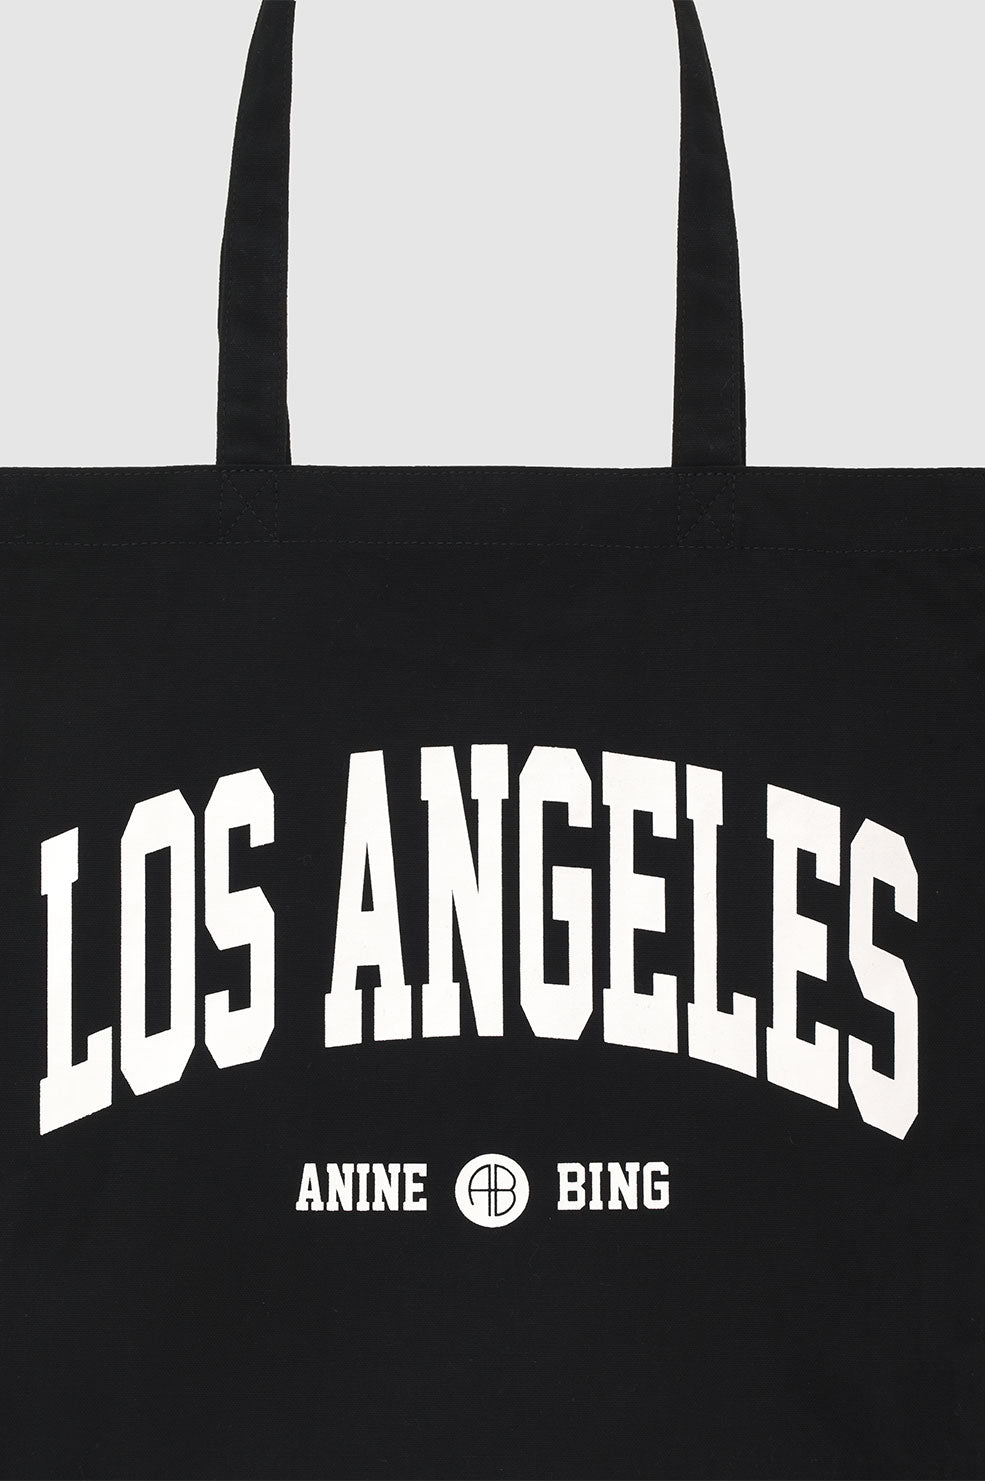 Anine Bing - Remy Canvas Tote in Black